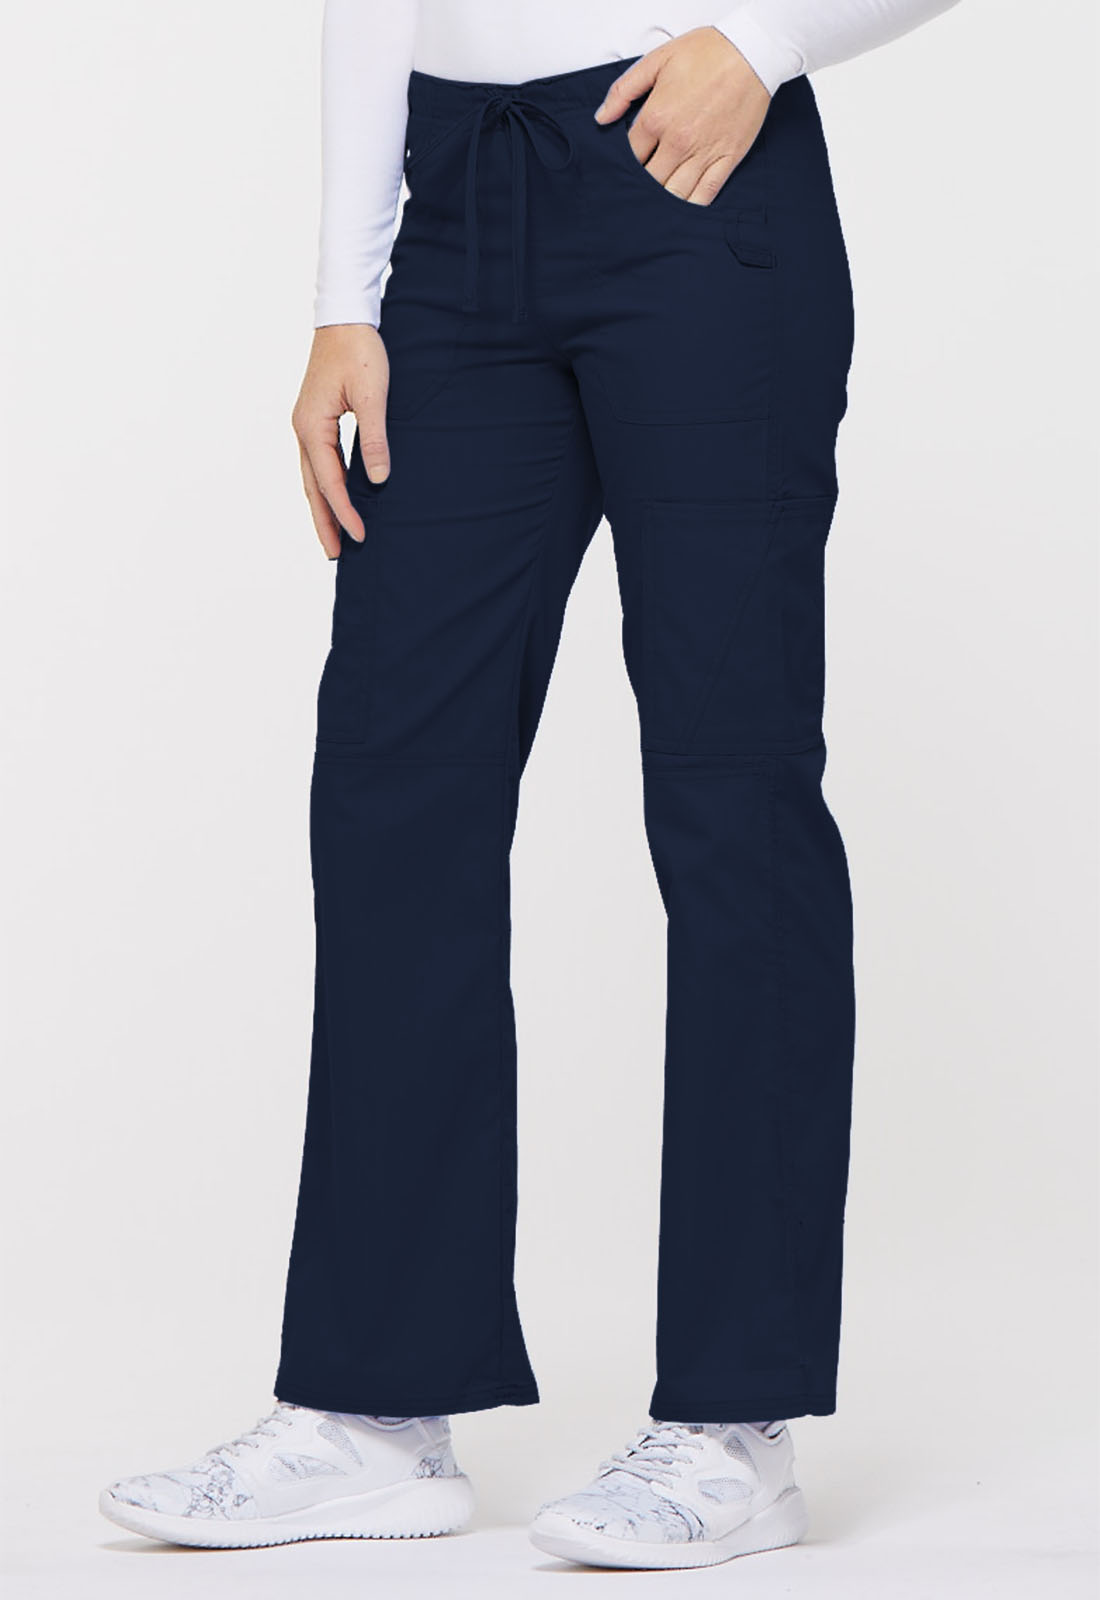 Dickies EDS Signature Drawstring Cargo Pant in Navy from Dickies Medical